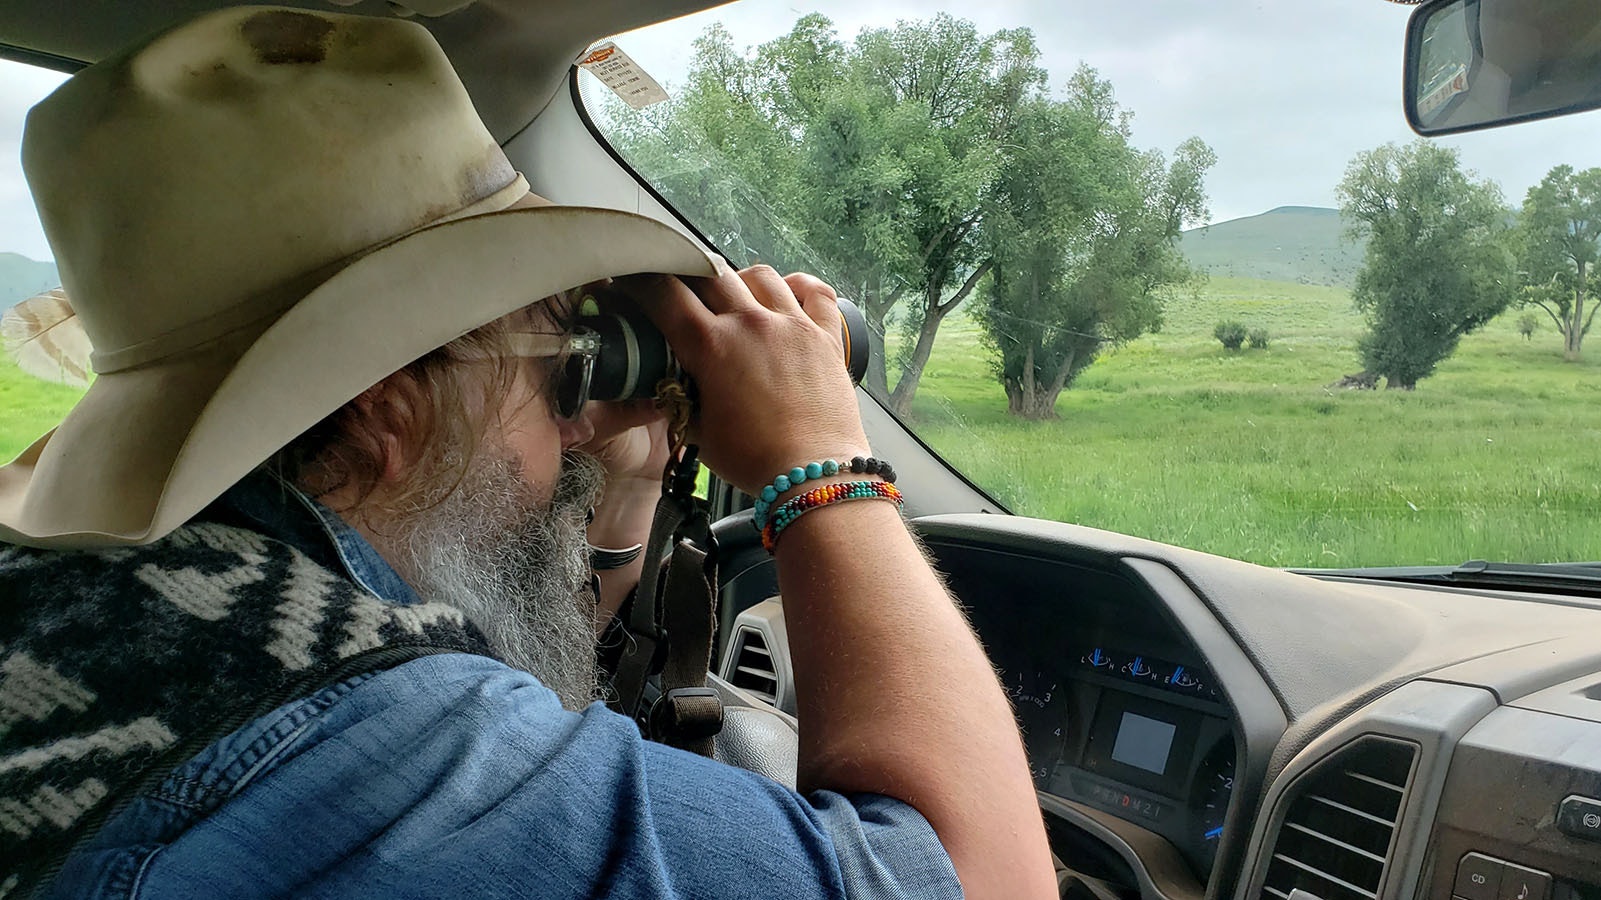 Josh Kirk checks on his 400-head bison herd in Fremont County, Wyoming. He's being featured on History Channel's "Mountain Men" series.